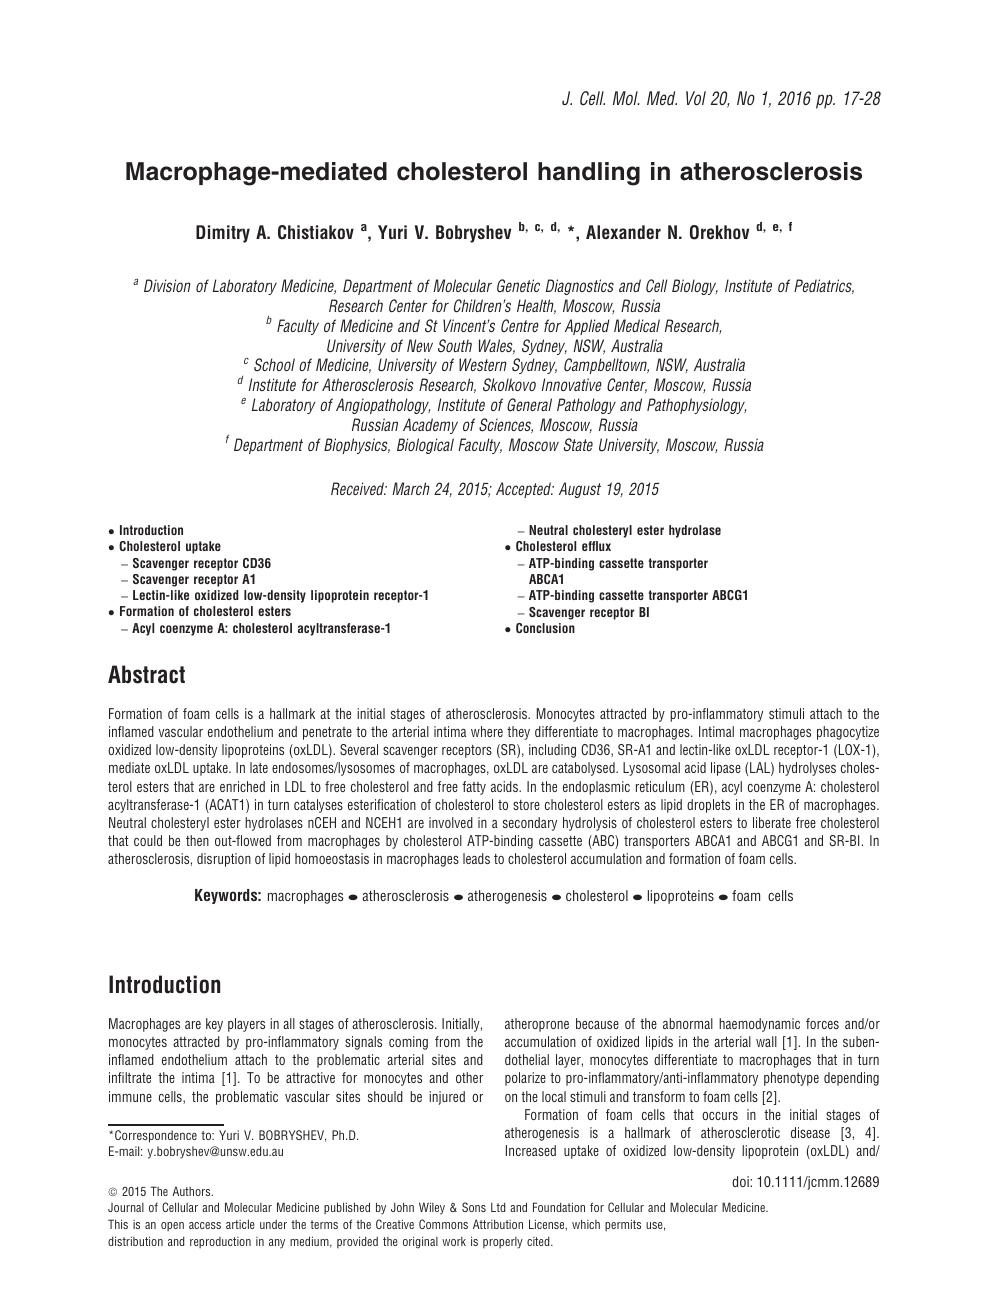 Macrophage Mediated Cholesterol Handling In Atherosclerosis Topic Of Research Paper In Biological Sciences Download Scholarly Article Pdf And Read For Free On Cyberleninka Open Science Hub